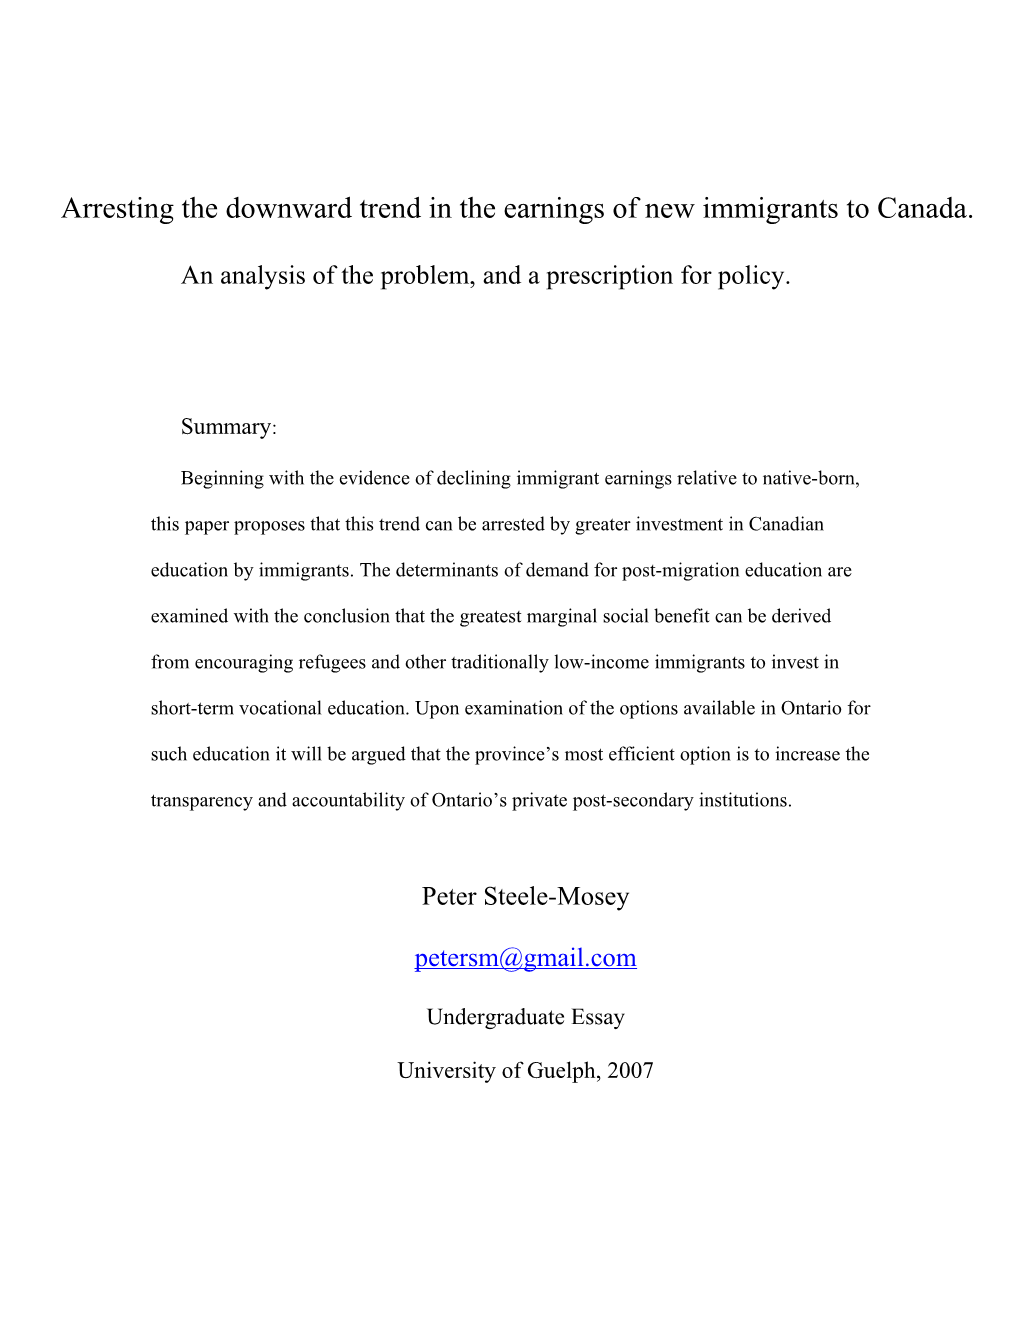 Arresting the Downward Trend in the Earnings of New Immigrants to Canada